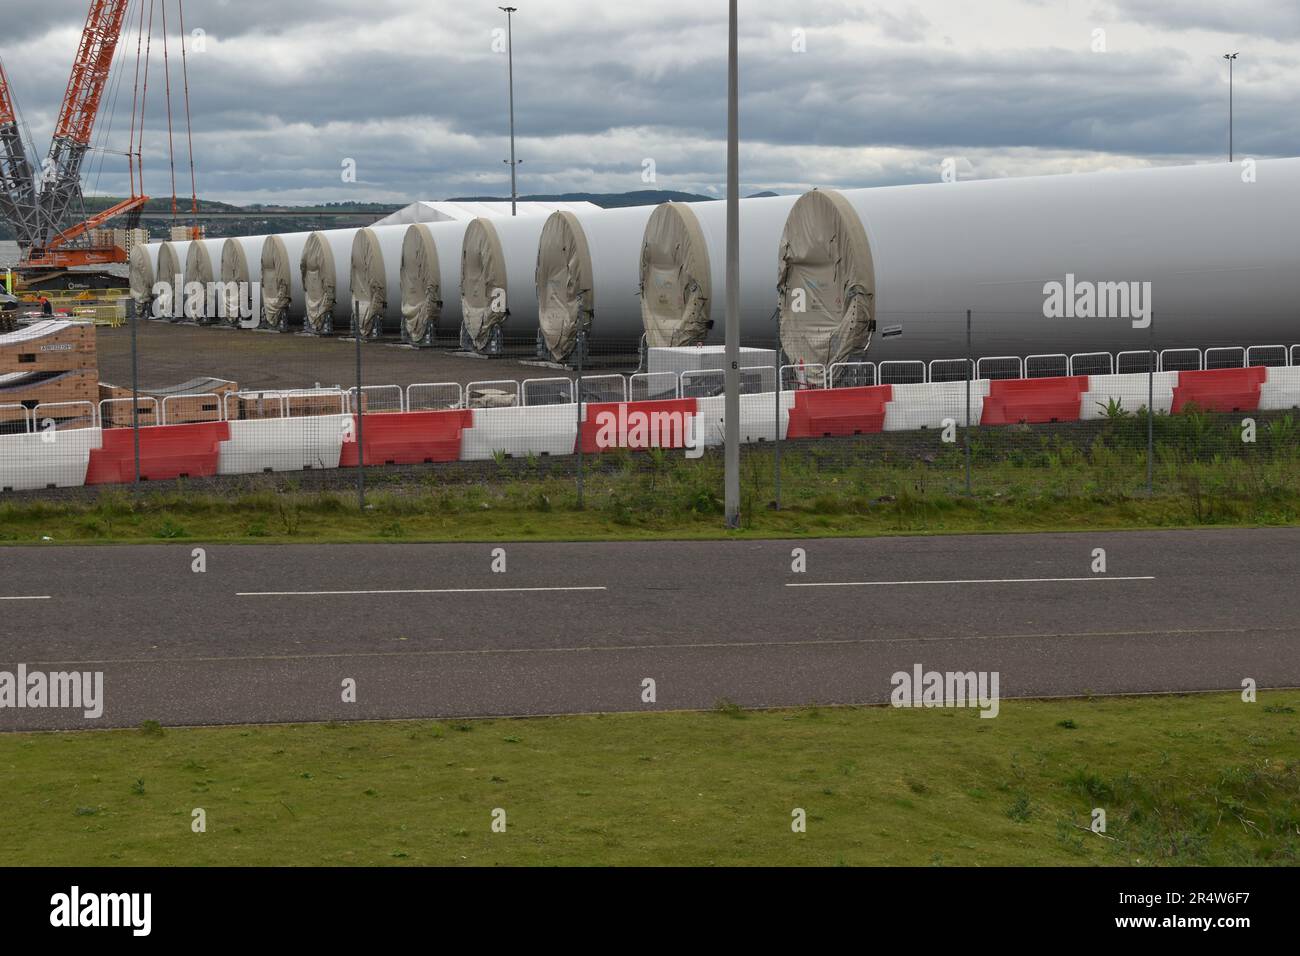 May 2023: Sections of Siemens wind turbine towers await pre-assembly at Port of Dundee before deployment to Neart na Gaoithe (NnG) offshore wind farm. Stock Photo